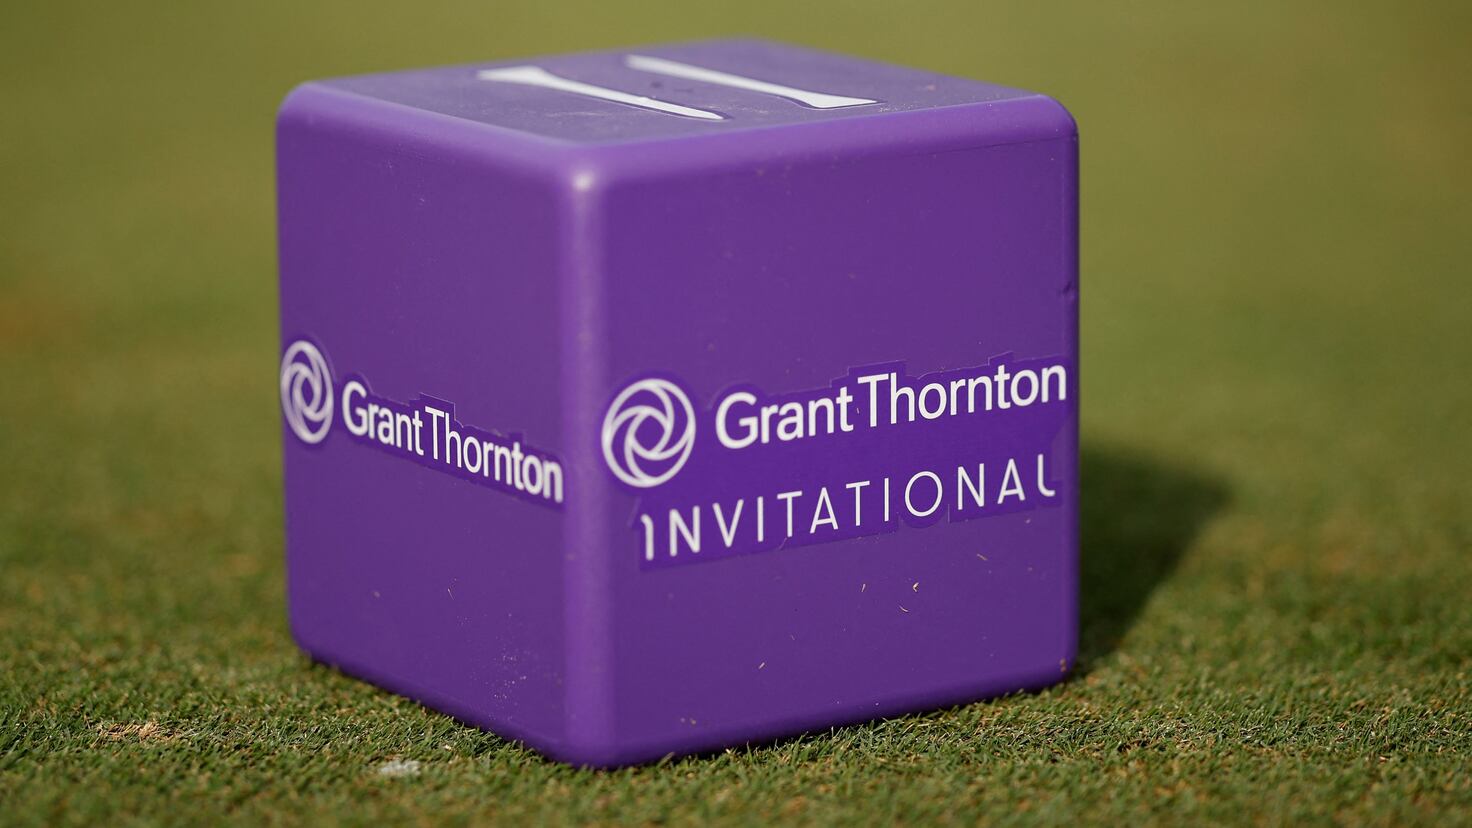 How much prize money does the winning team get at the Grant Thornton